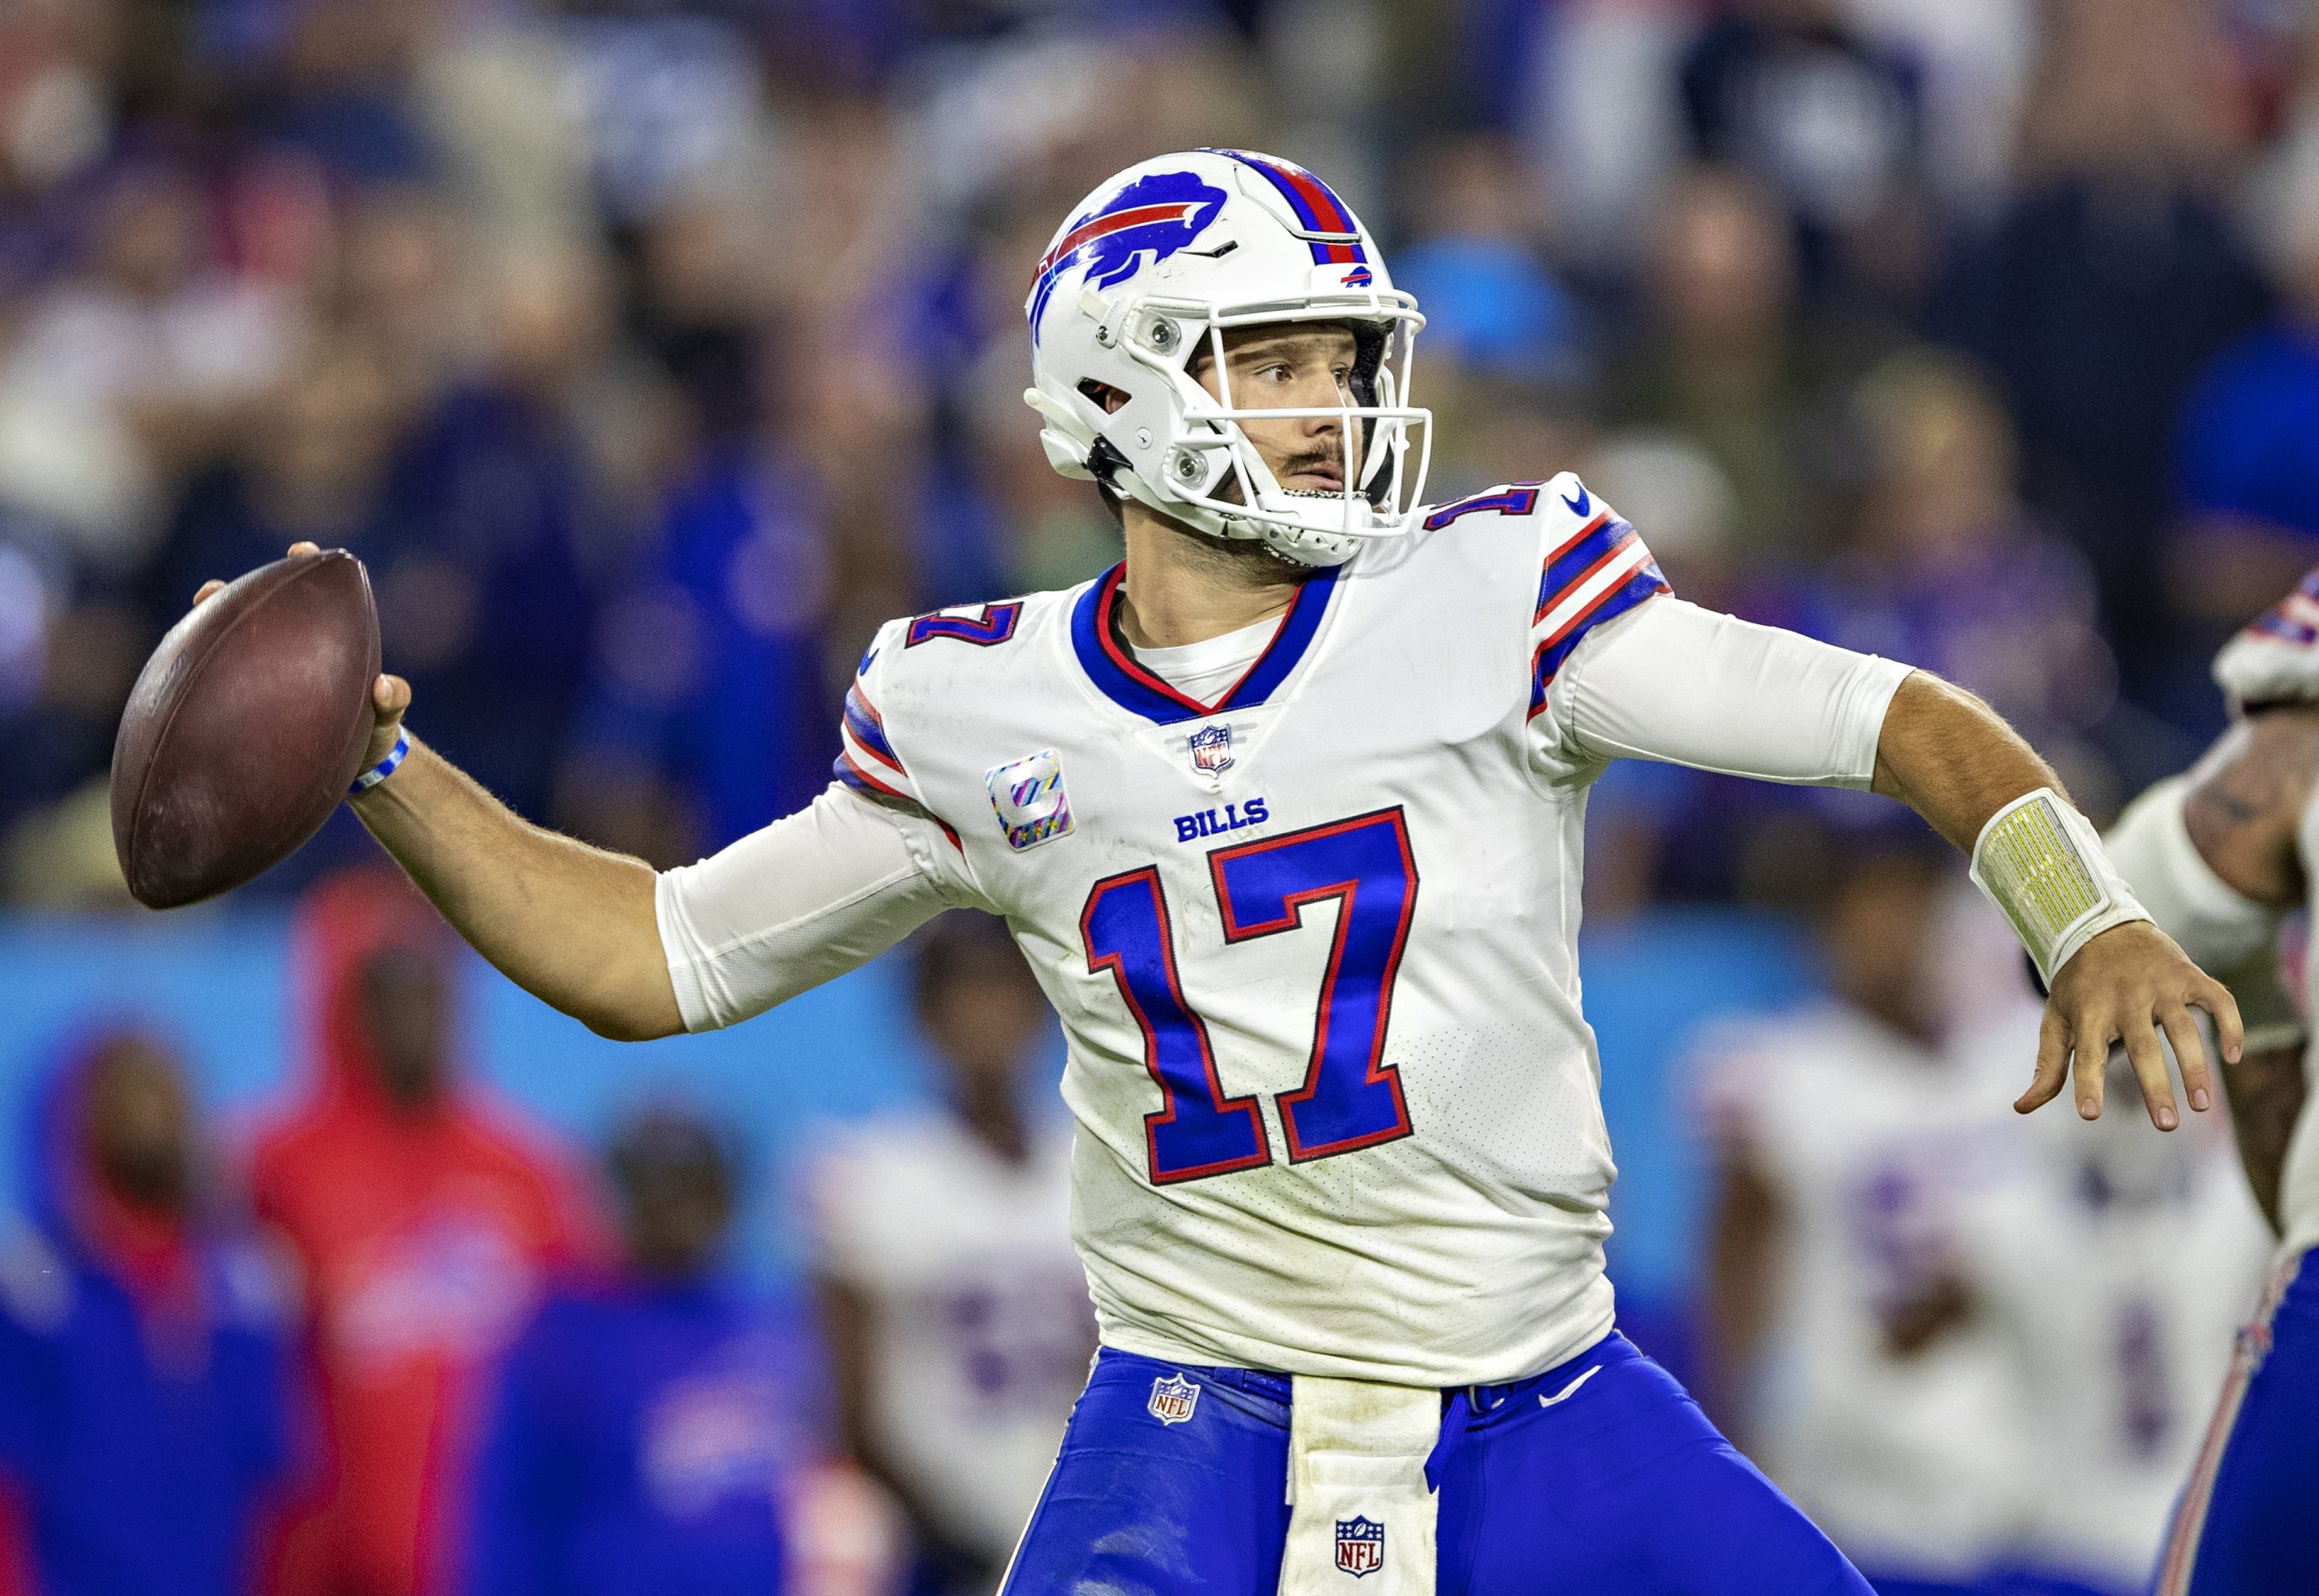 NFL picks, predictions against the spread Week 8: Bills blow out Packers;  Seahawks outrun Giants; Cardinals creep past Vikings